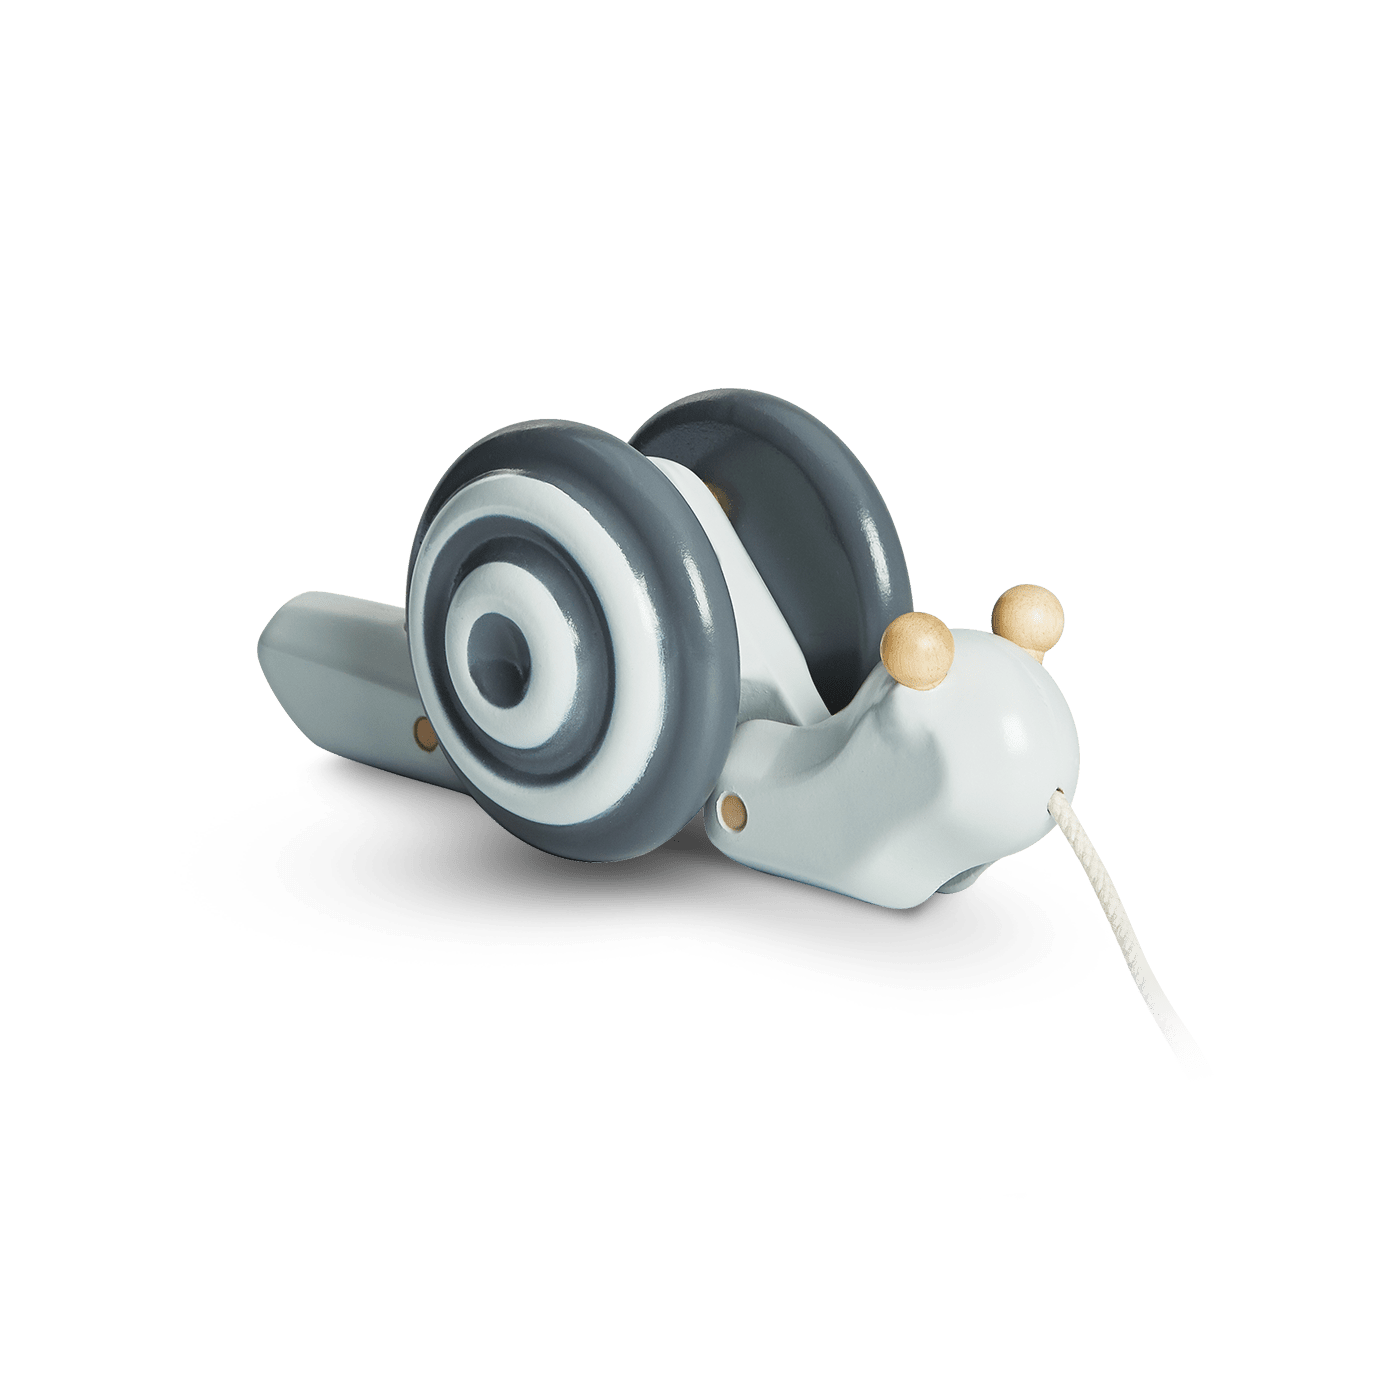 5684_PlanToys_PULL-ALONG_SNAIL_MONO_Push_and_Pull_Coordination_Gross_Motor_Language_and_Communications_Imagination_12m_Wooden_toys_Education_toys_Safety_Toys_Non-toxi